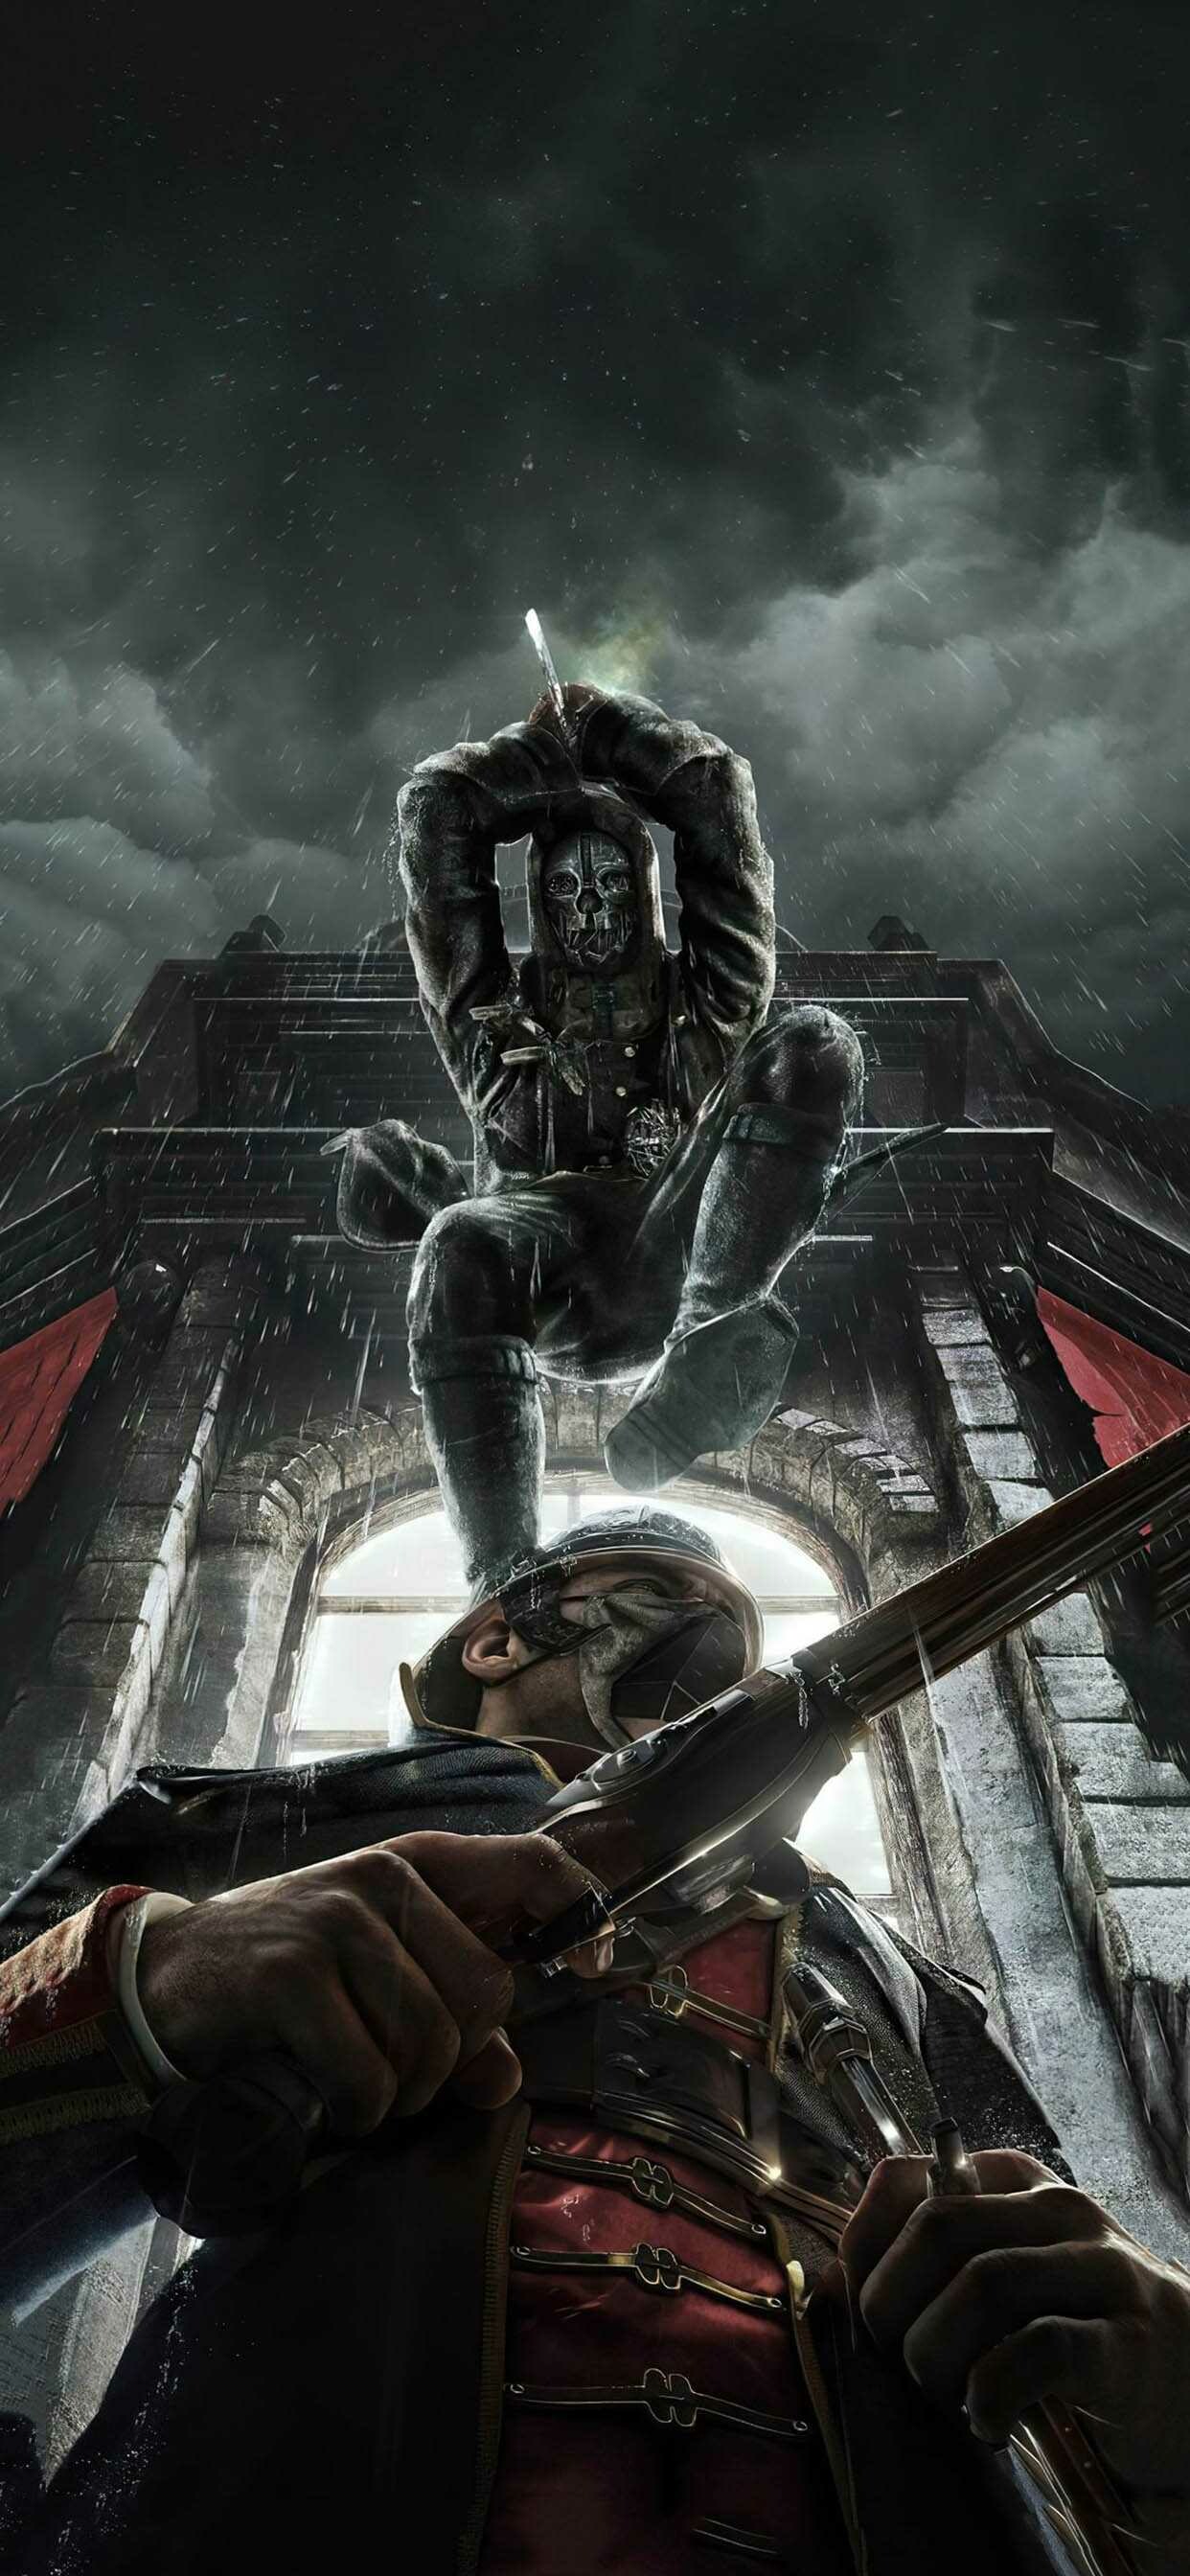 Dishonored: The focus of the game is on affecting the world and the narrative through Corvo's actions. 1250x2690 HD Background.